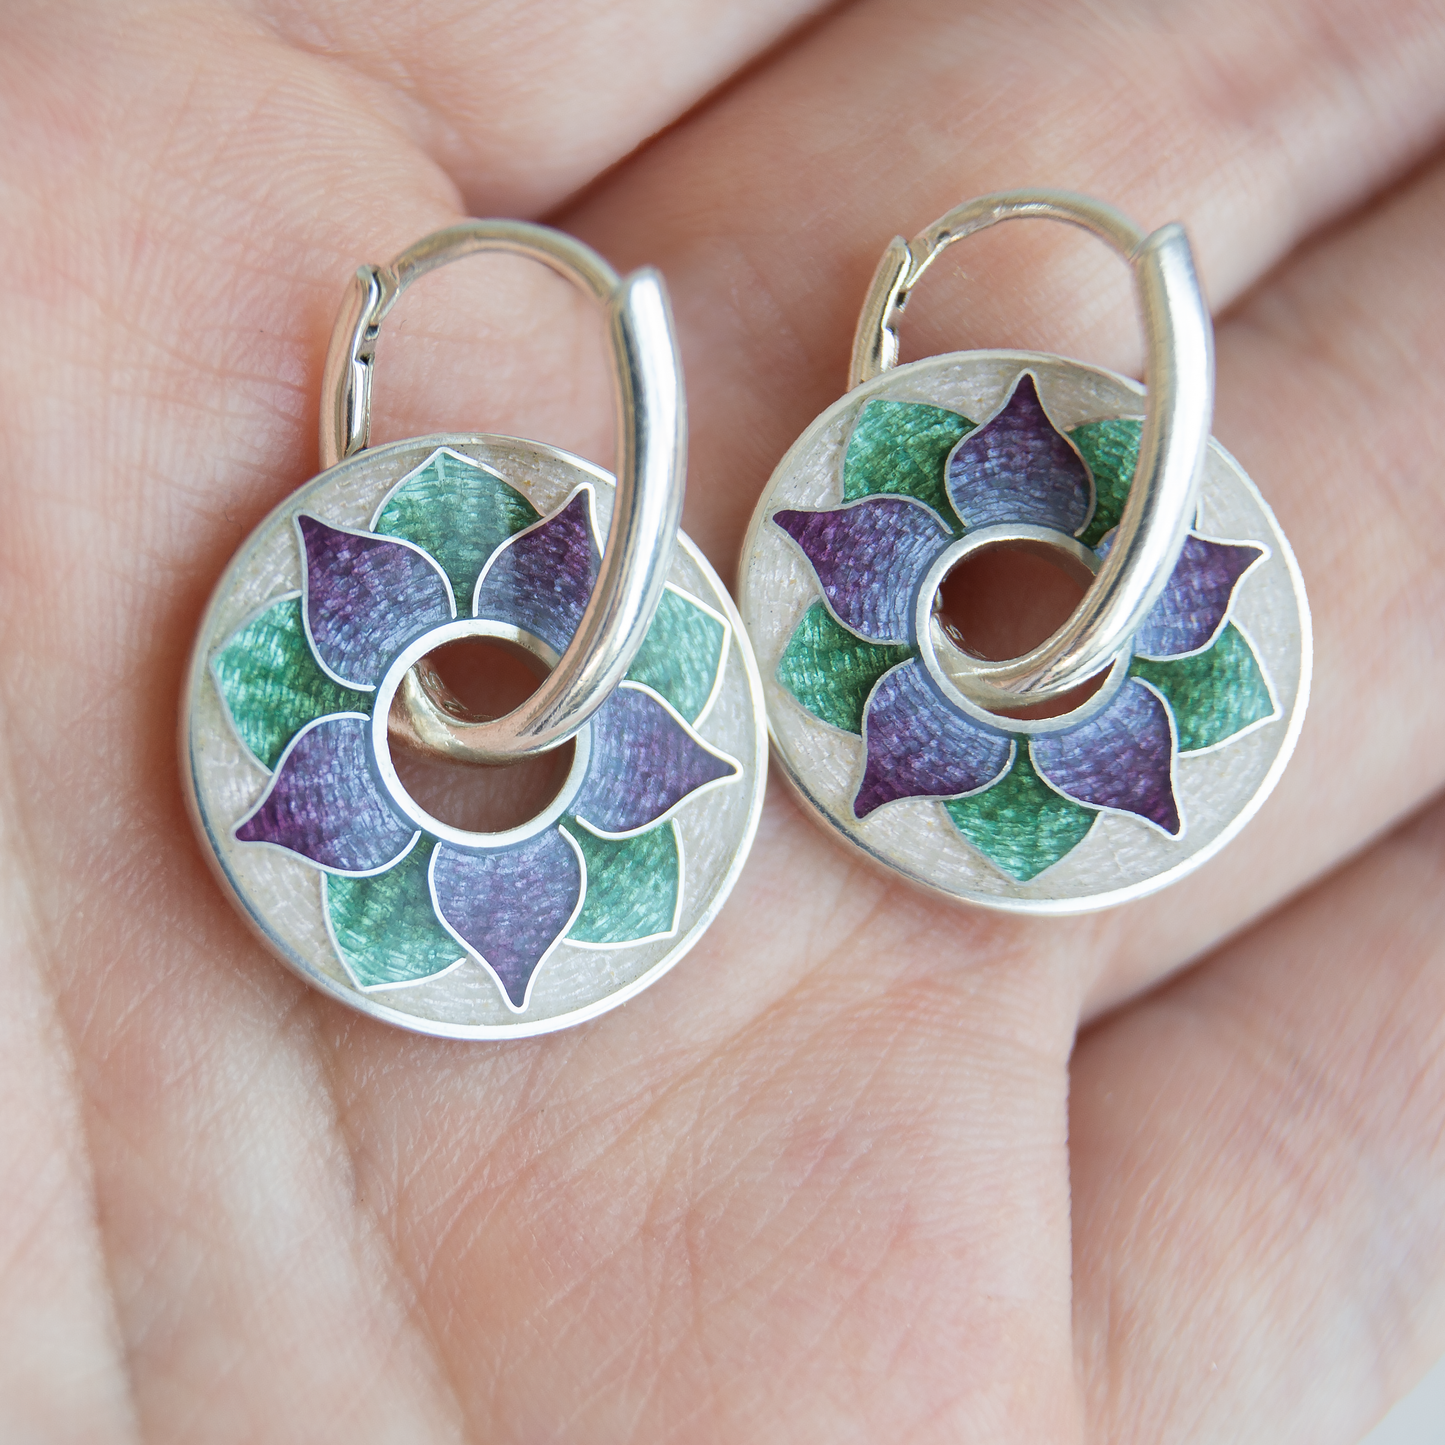 Rotating Floral Cloisonné Enamel, Silver Earrings "Glory-Of-The-Snow"